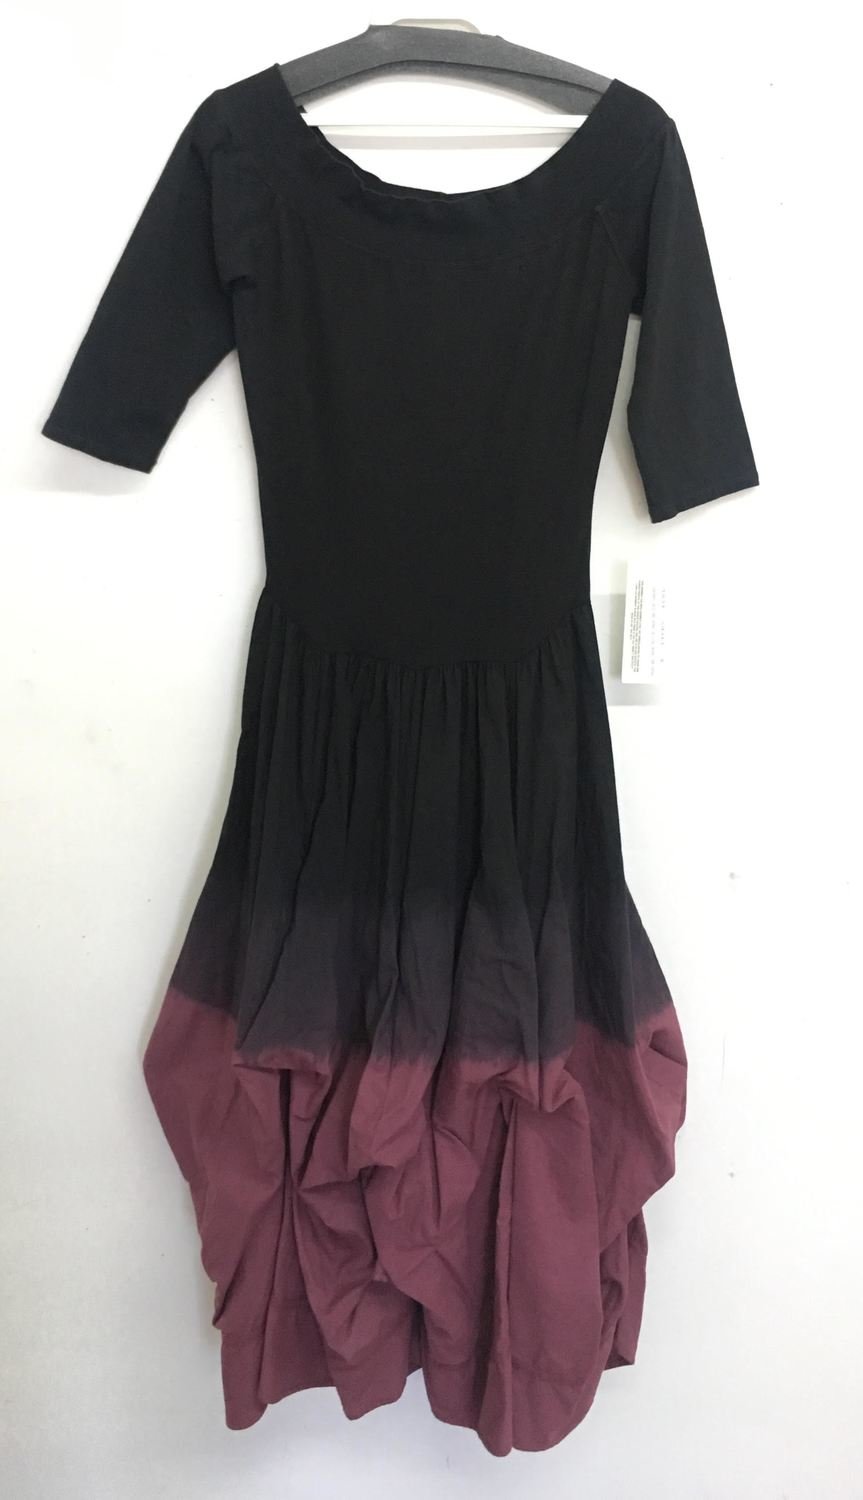 Luna Luz: Cherry Ombre Off The Shoulder Tied & Dyed Dress SOLD OUT